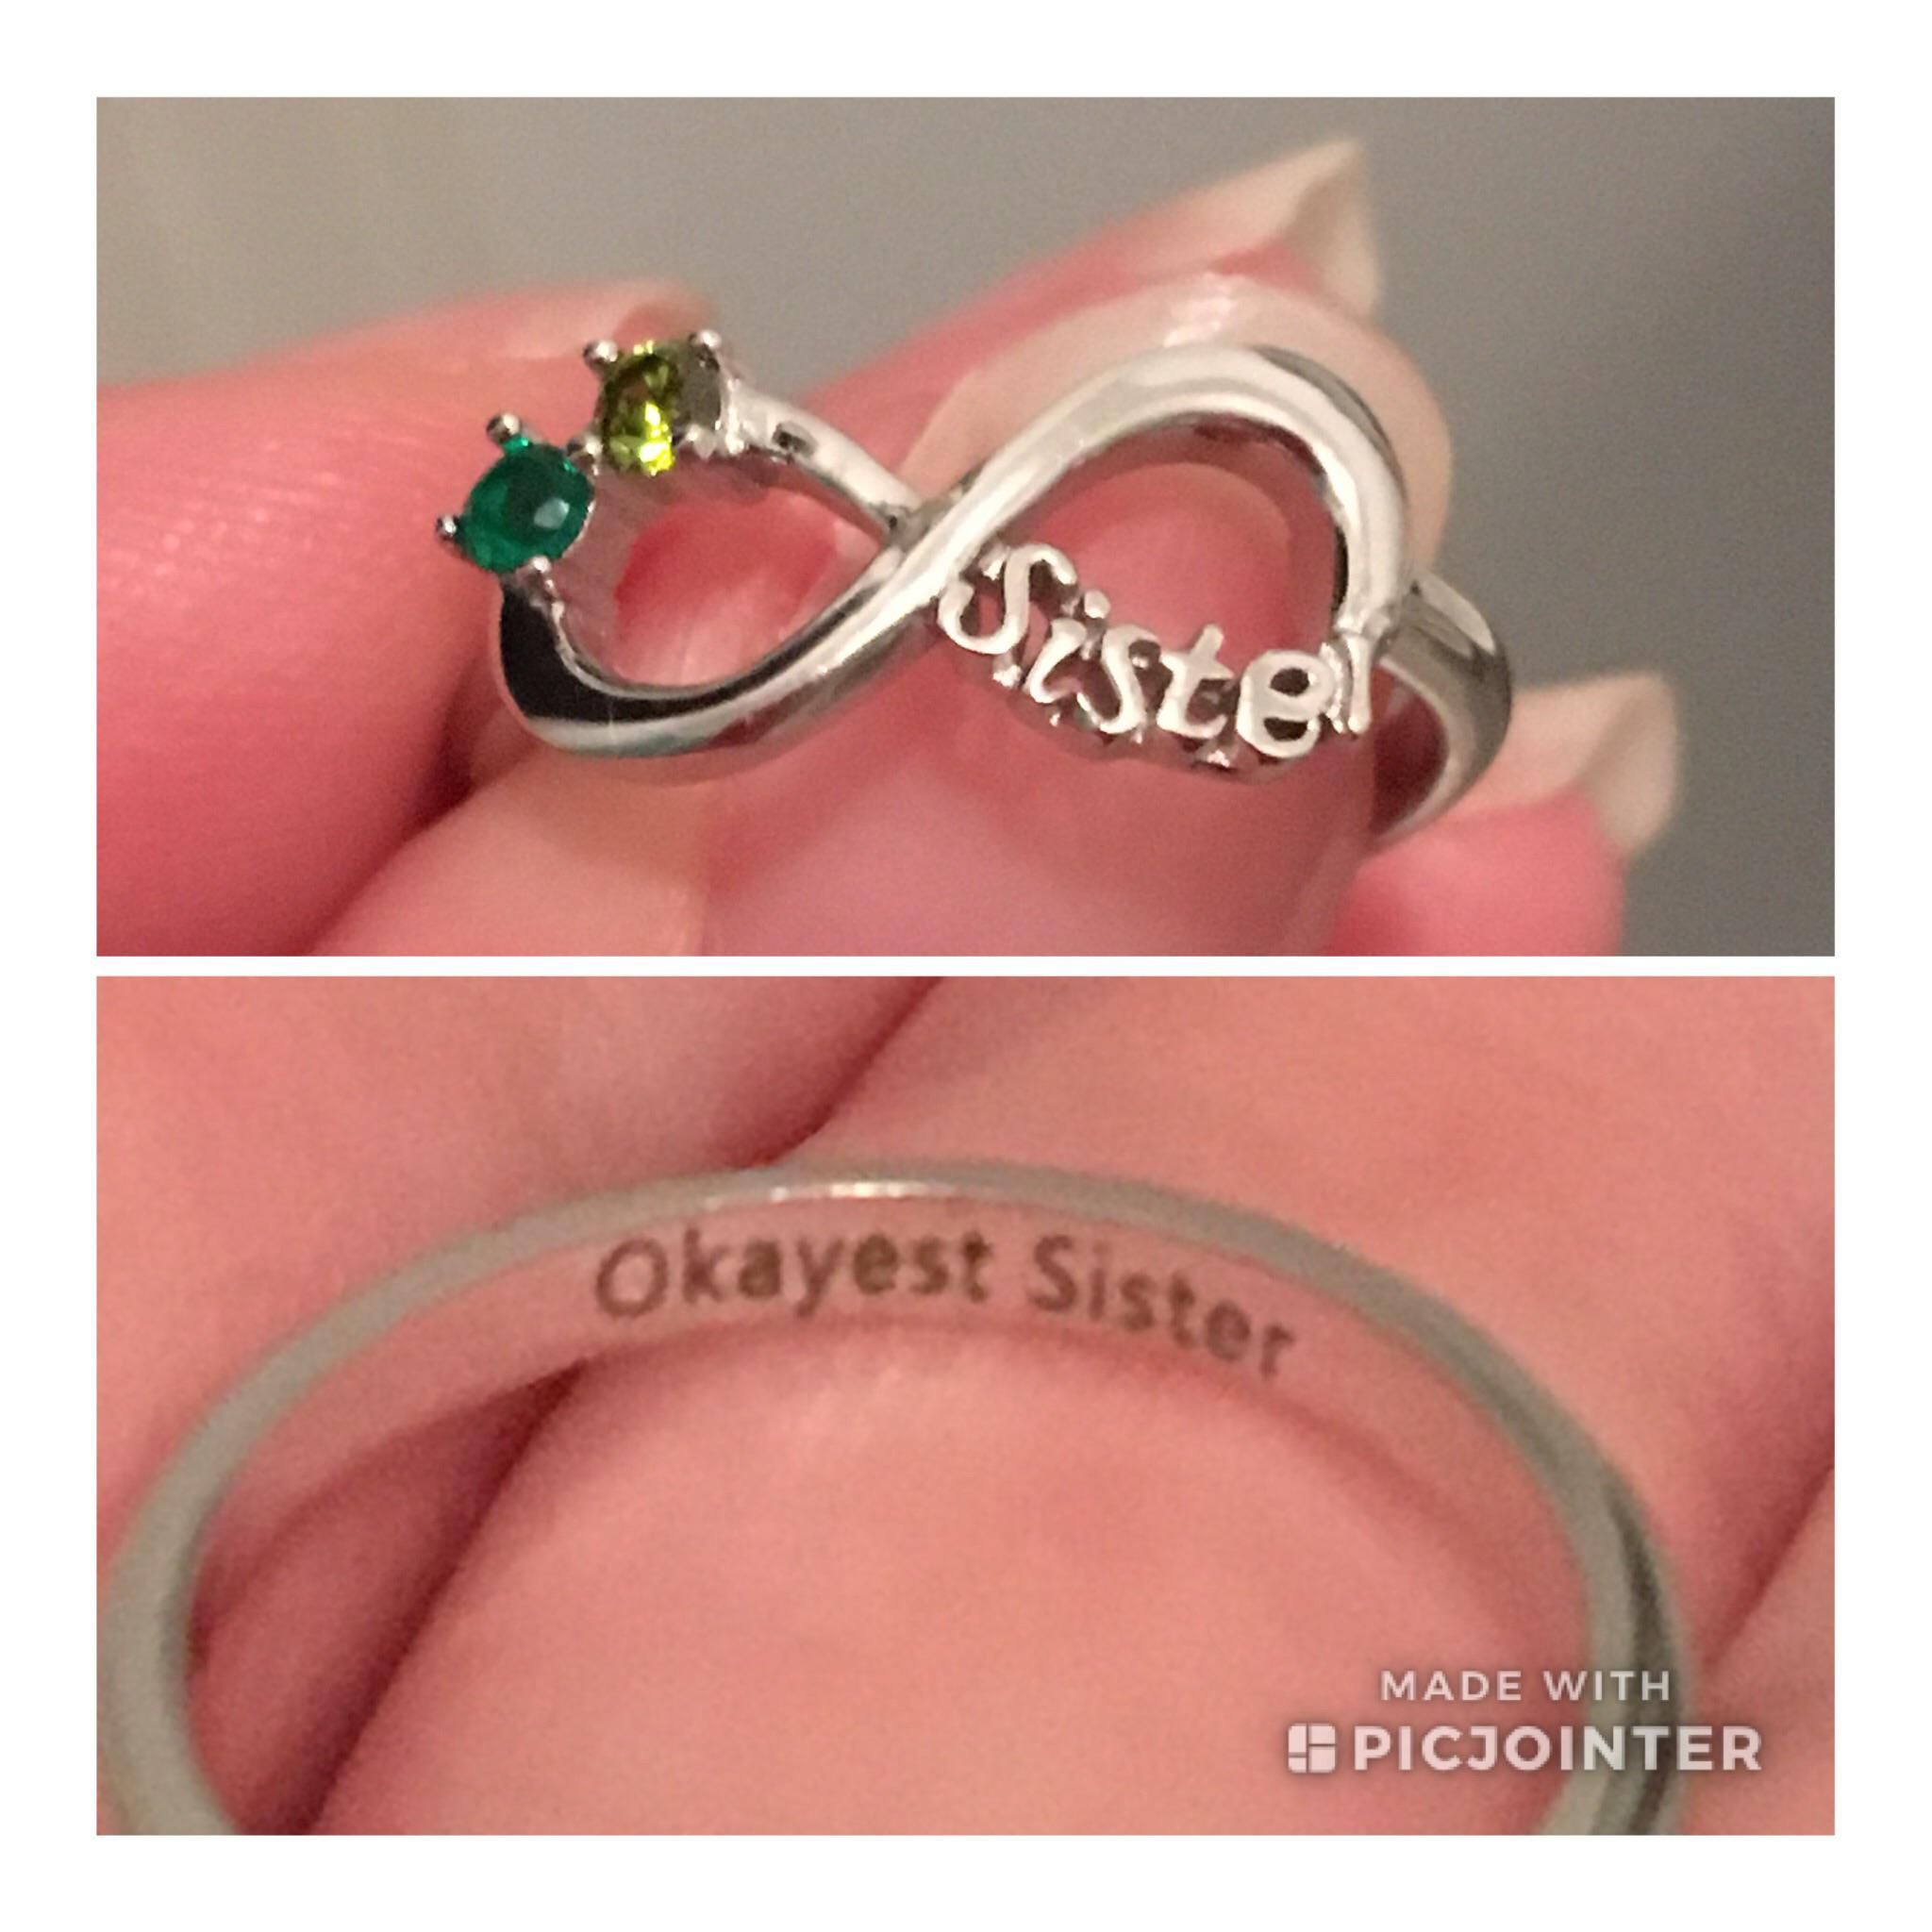 My sister bought me this ring with our birthstones for my birthday with a super sentimental message engraved on the inside